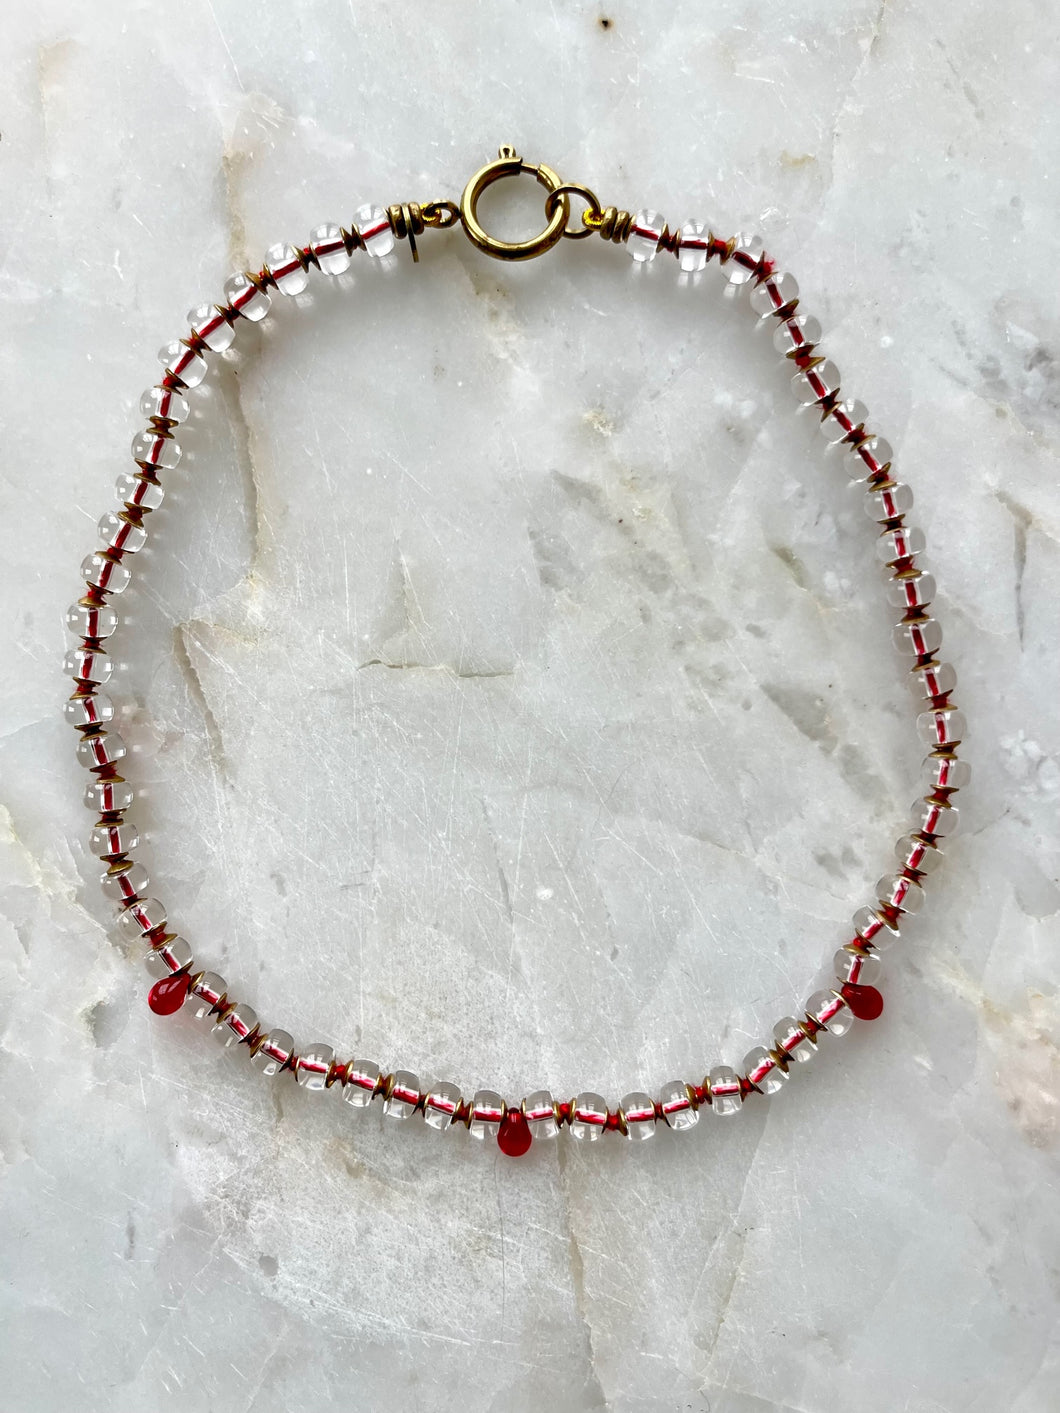 The Bloodlust necklace